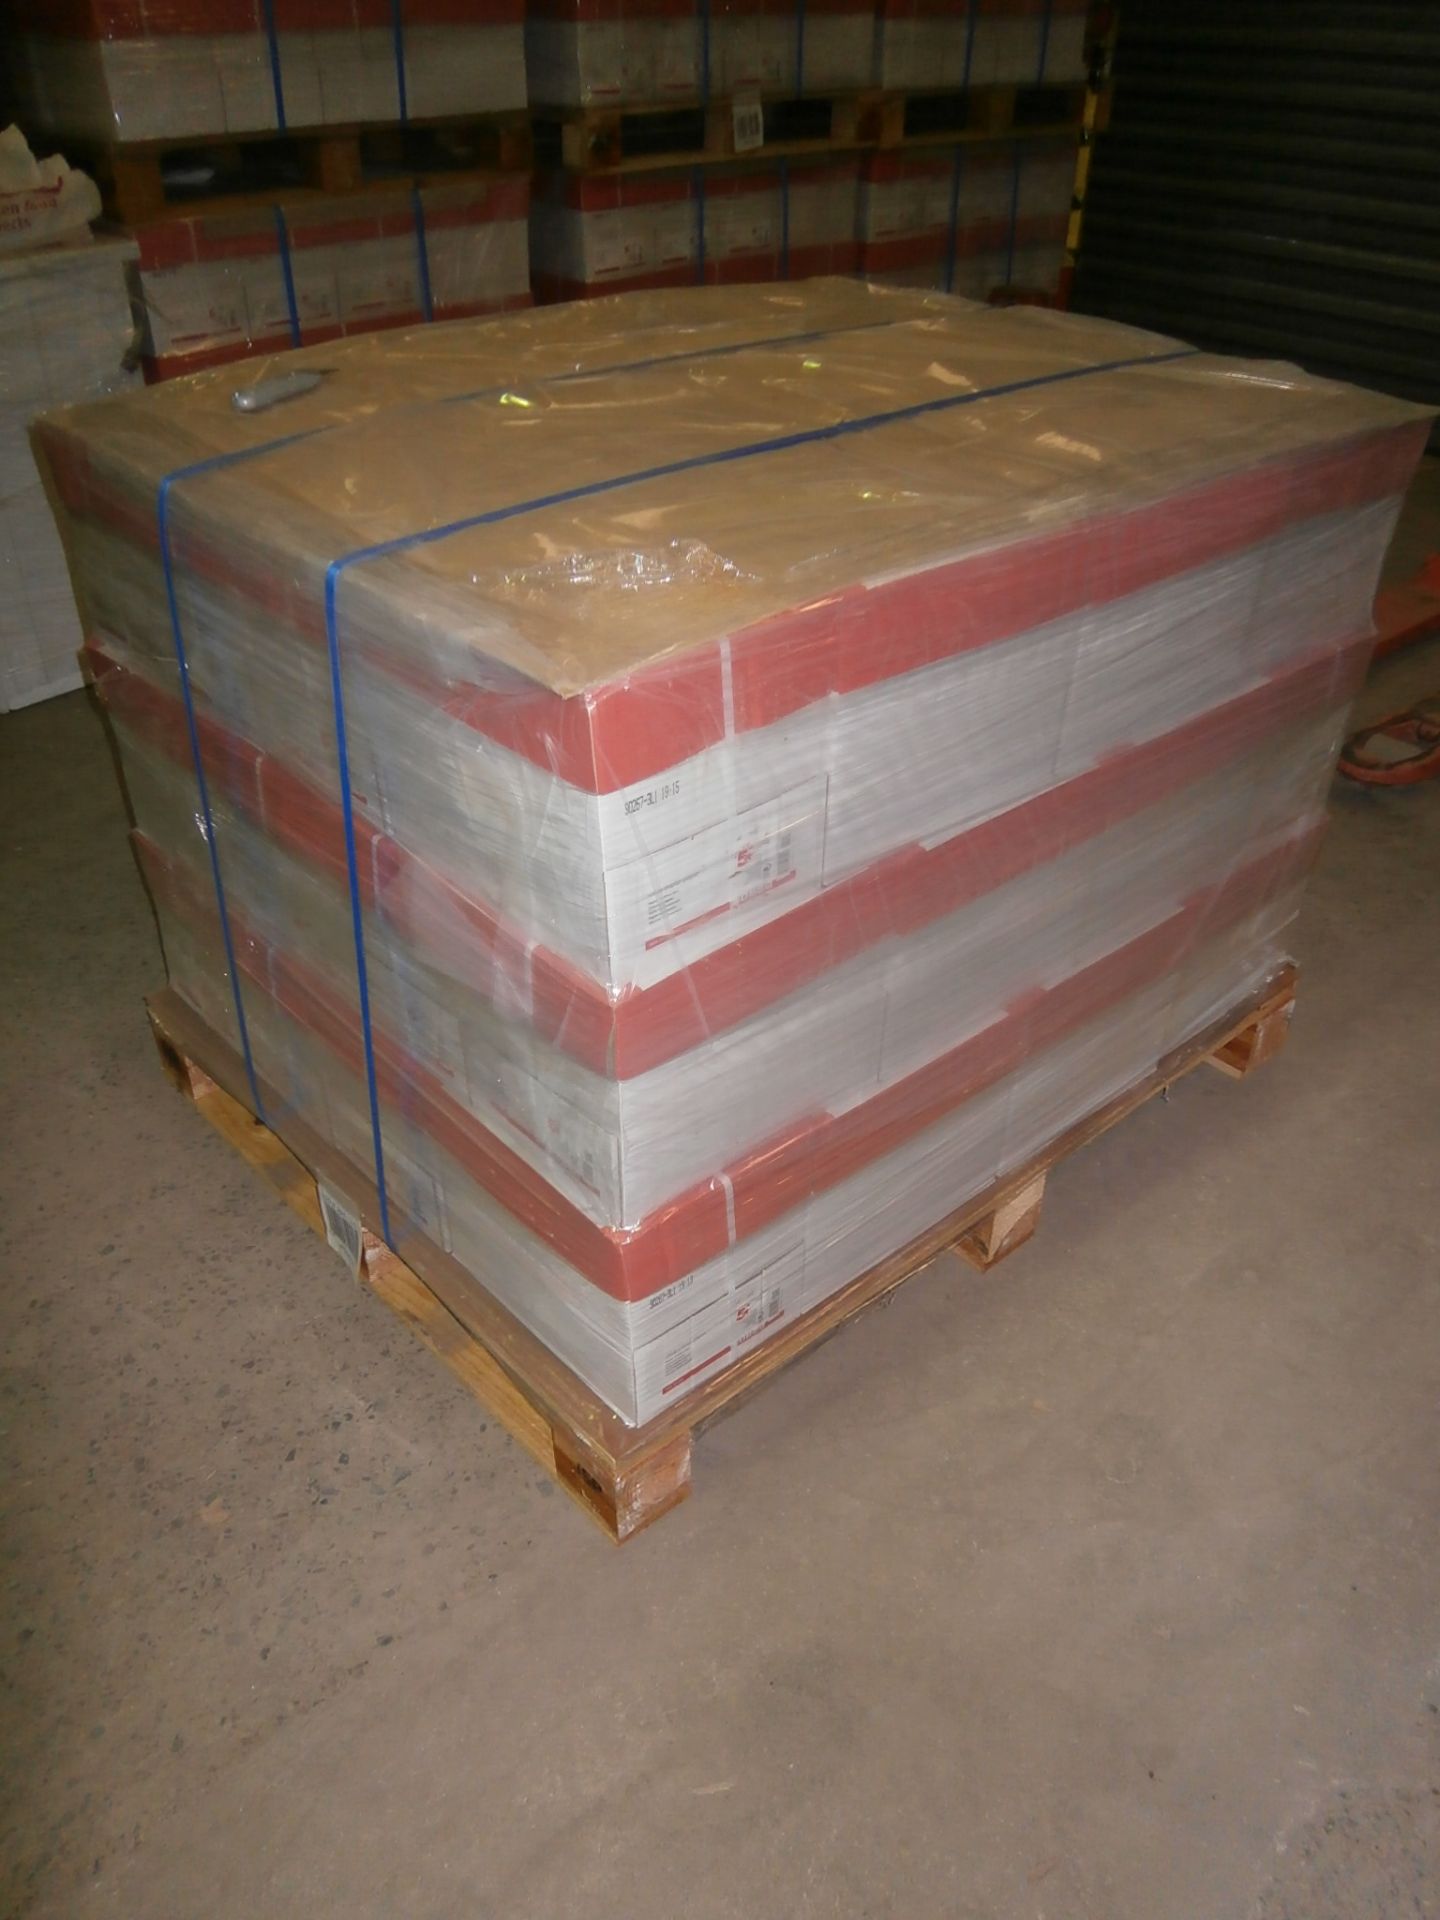 1 x Pallet of 5 Star 75gsm A4 Copier Paper - 5 Packs of 500 Sheets Per Box - 48 Boxes in Total ( - Image 2 of 3